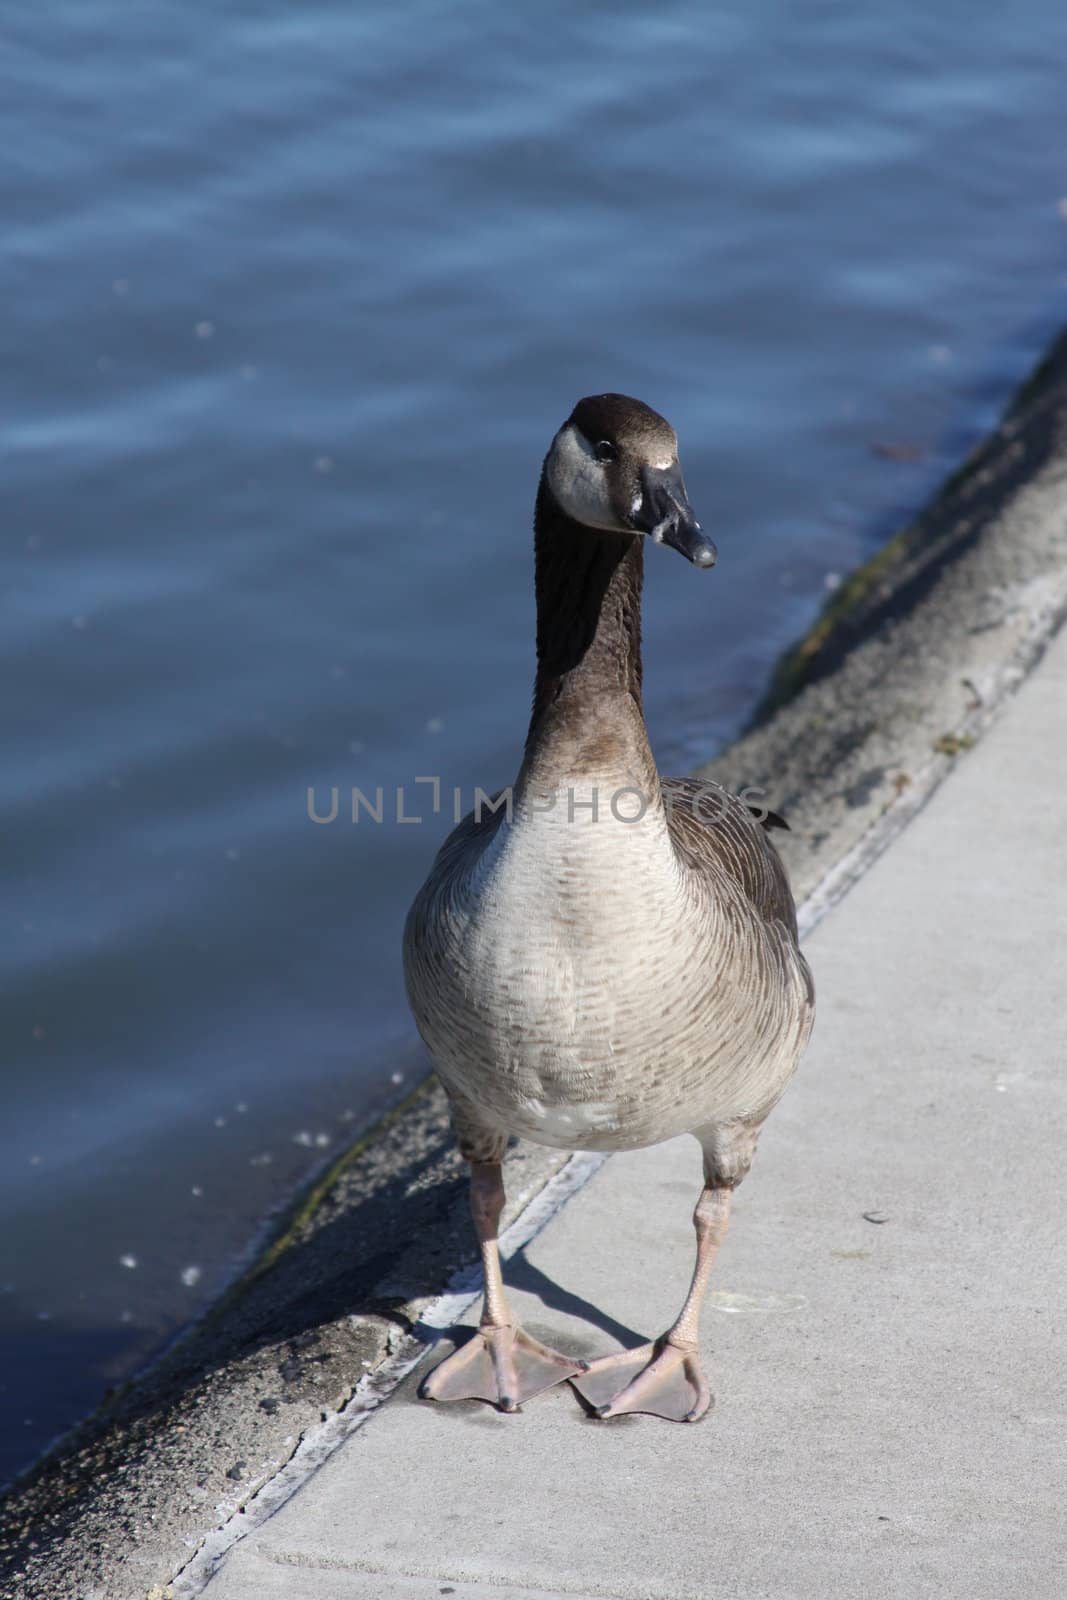 Close up of a funny looking Canadian goose showing his face.